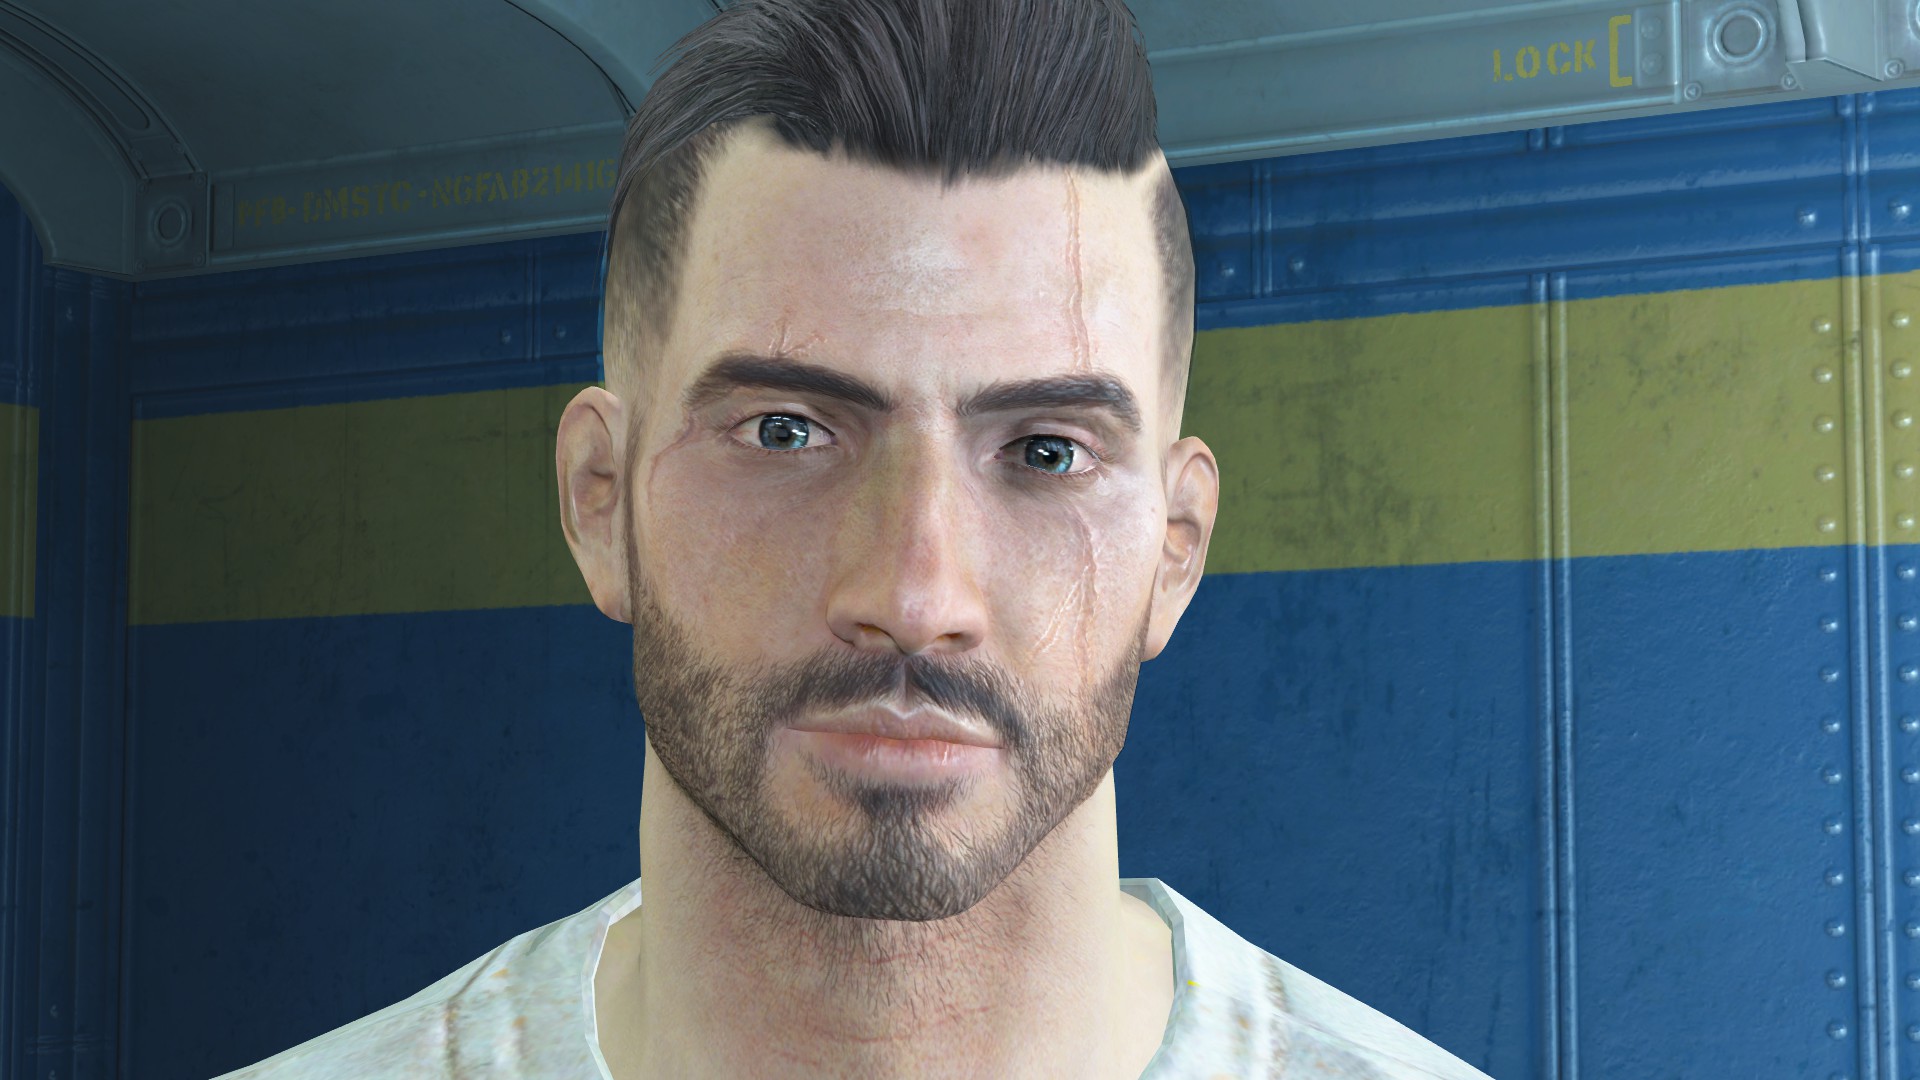 Hairstyles from fallout 4 for males - New Vegas Mod Requests - The